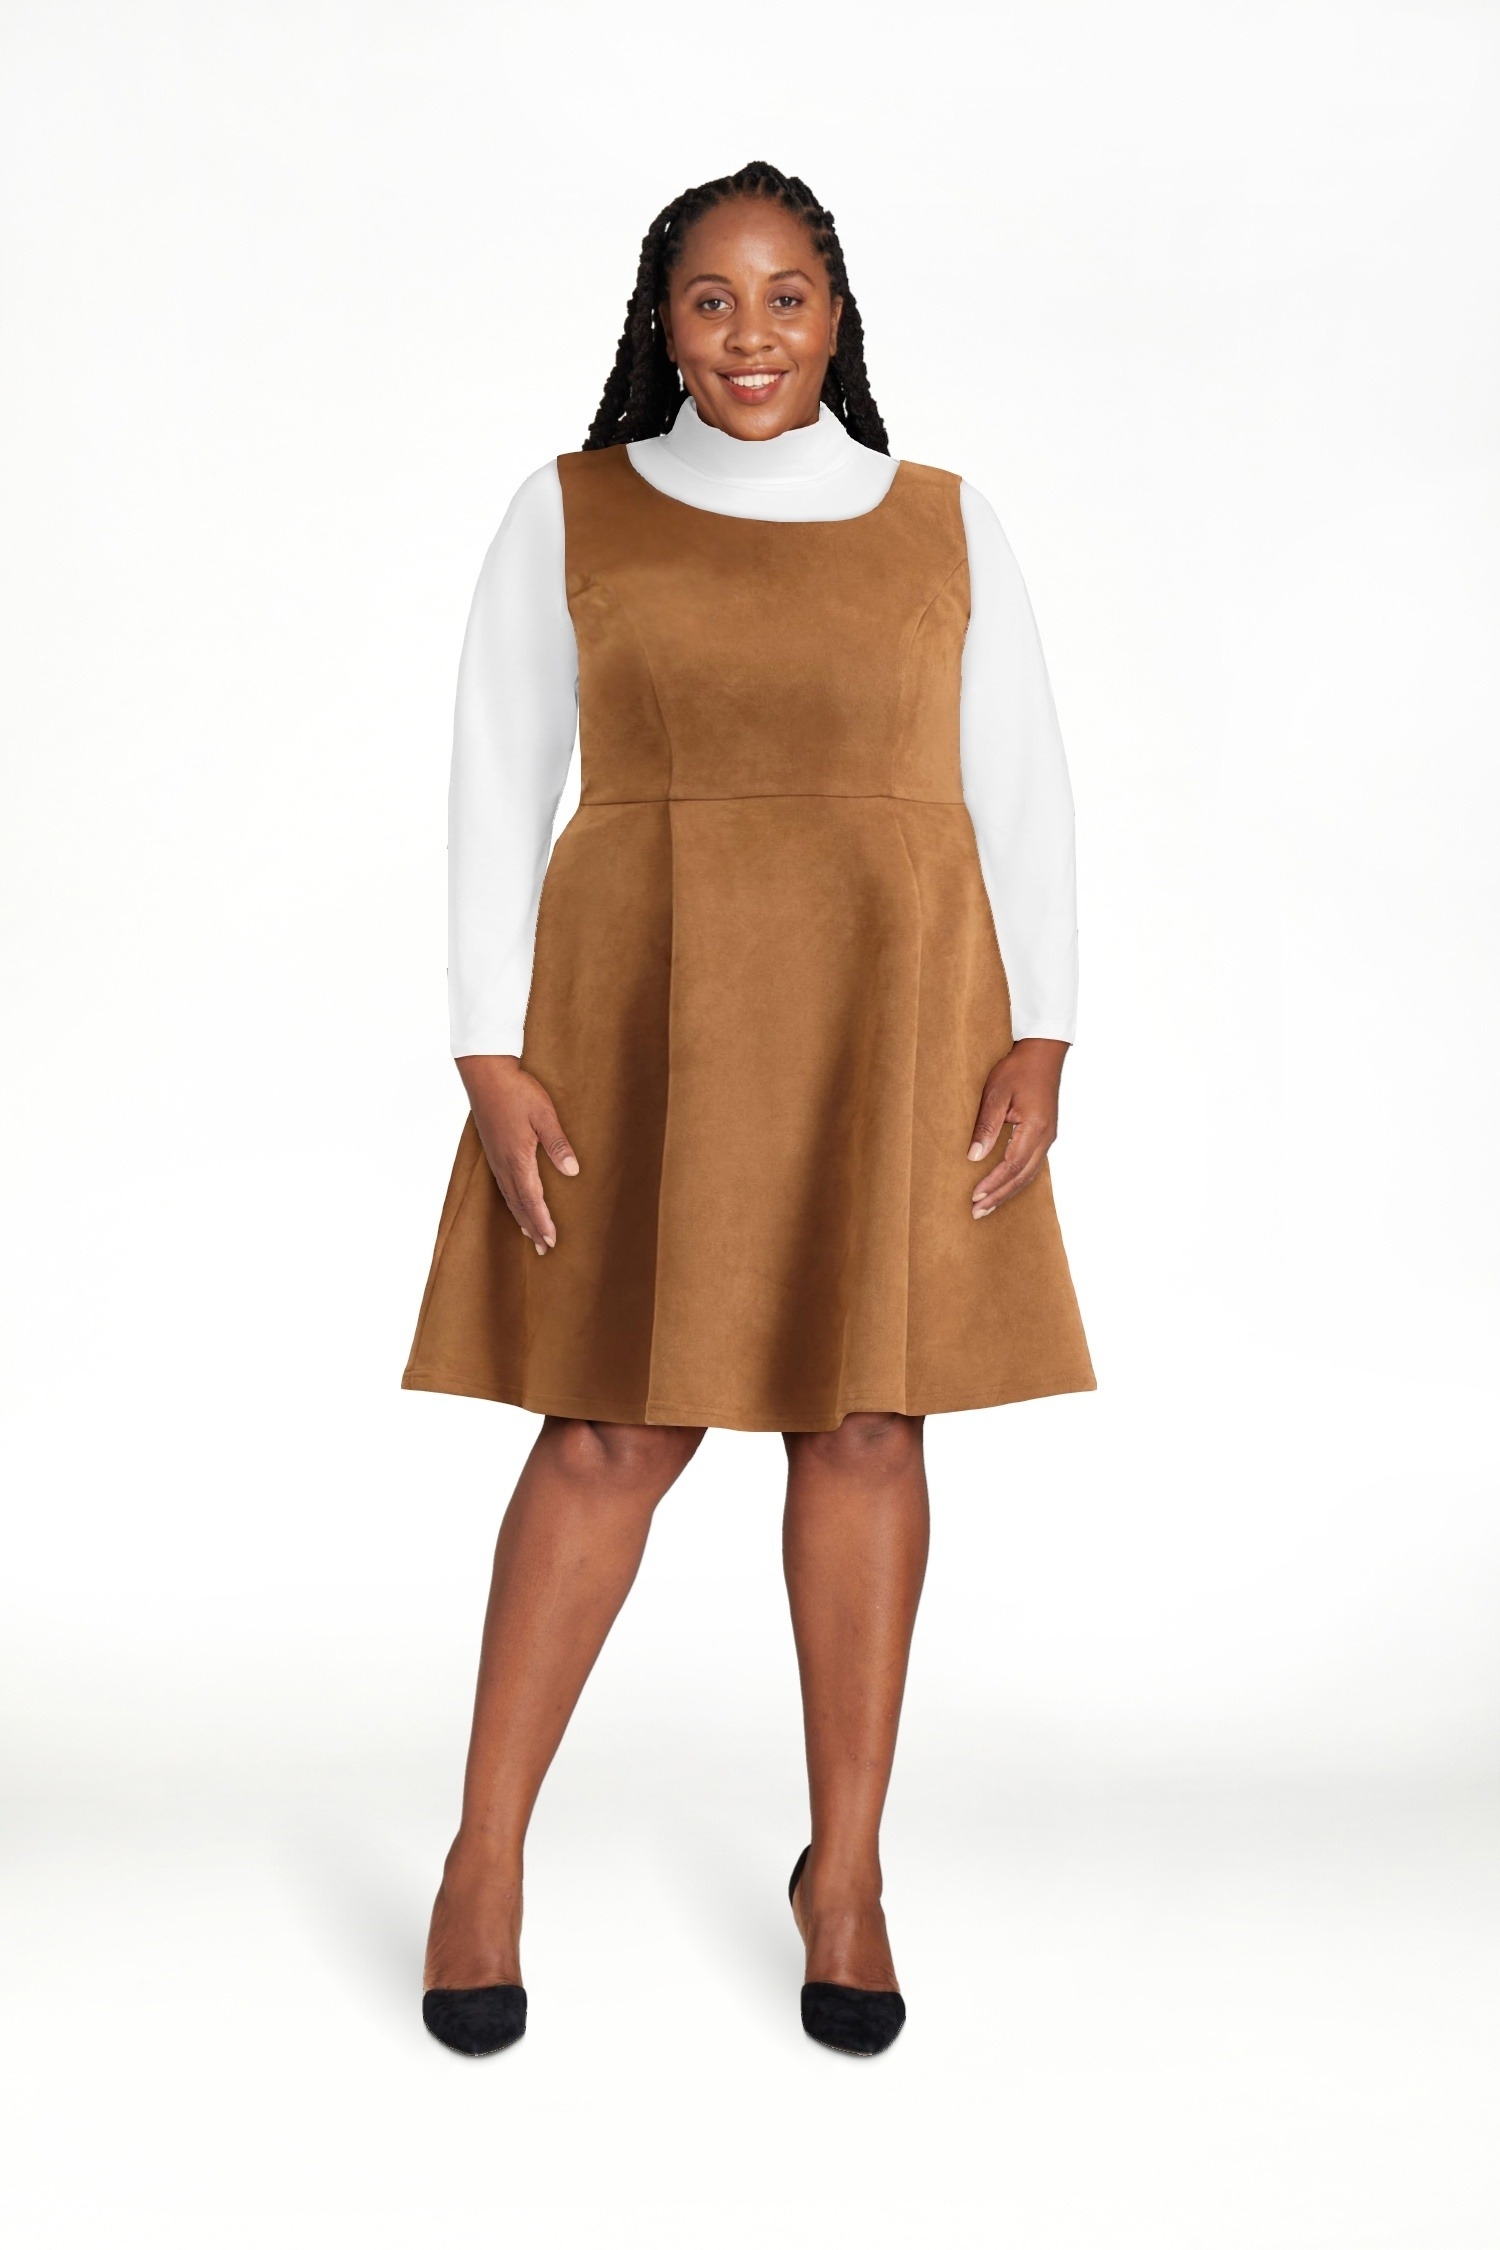 model wearing the brown overall dress with a white long sleeve underneath